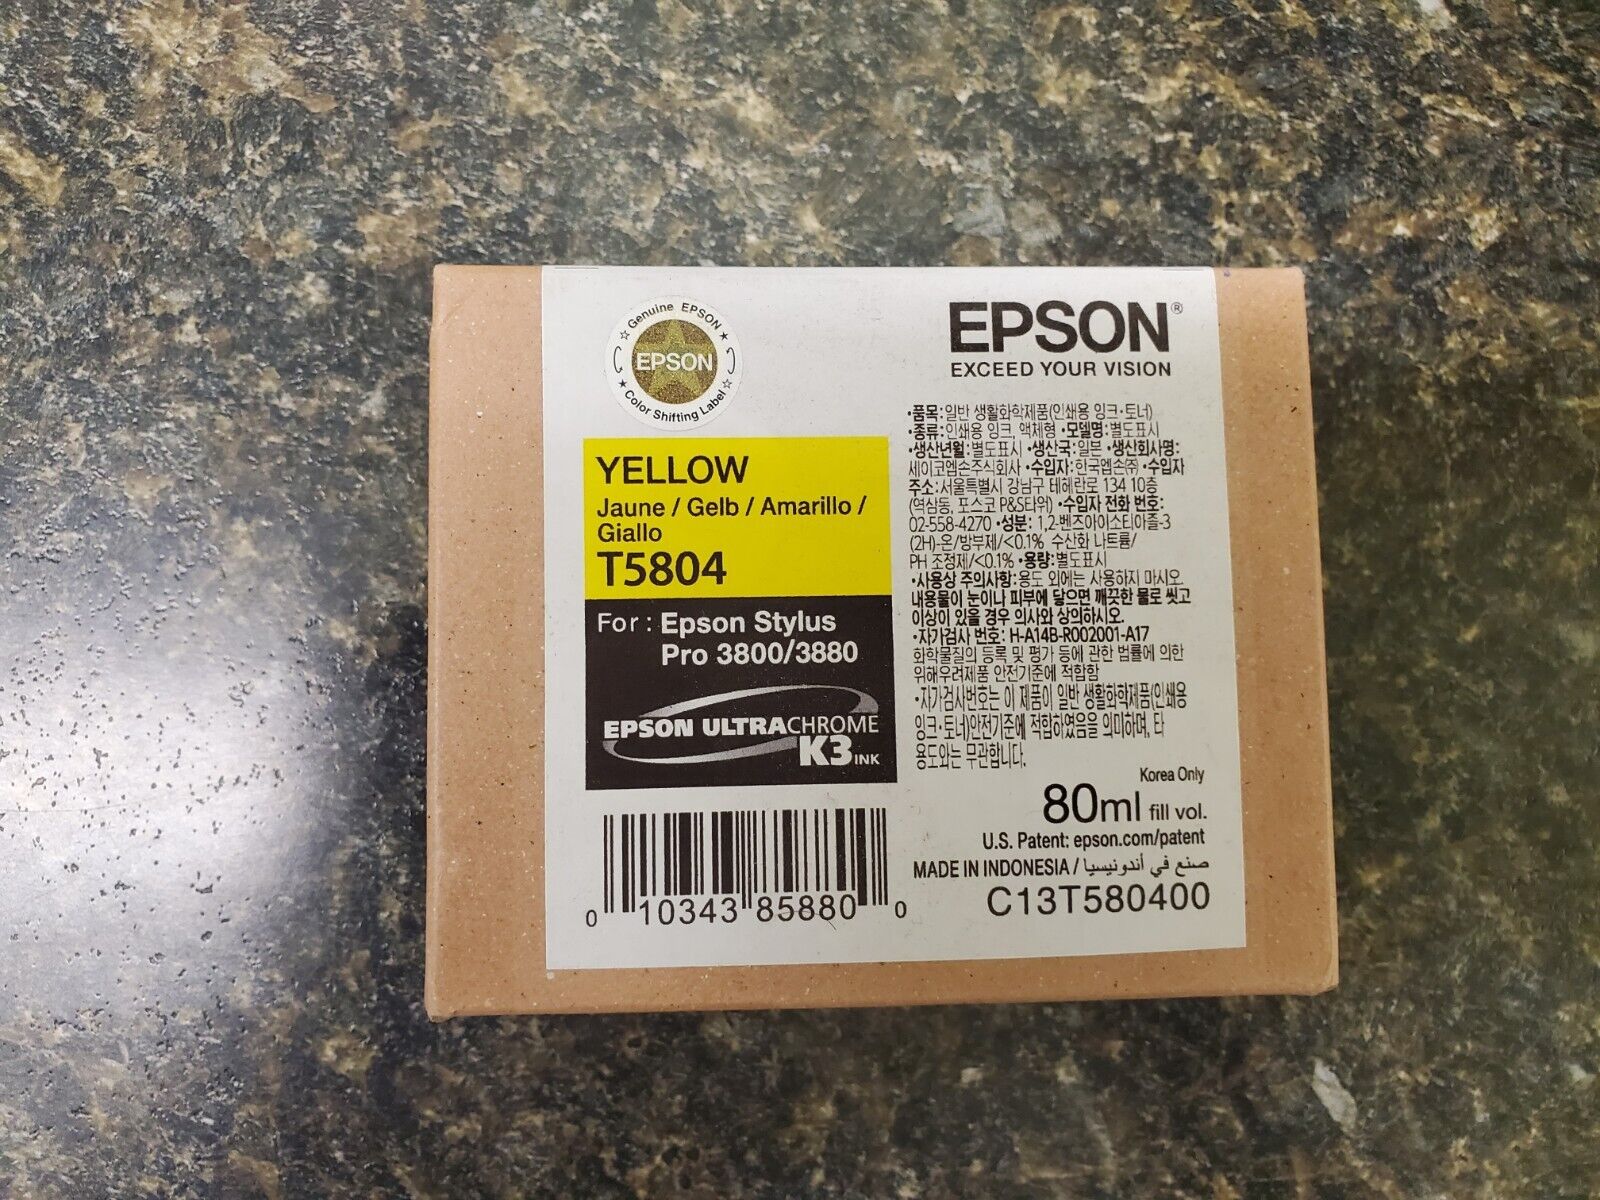 New in Box Exp 11-2021 Genuine Epson Pro 3800 3880 Yellow K3 Ink T5804 T580400